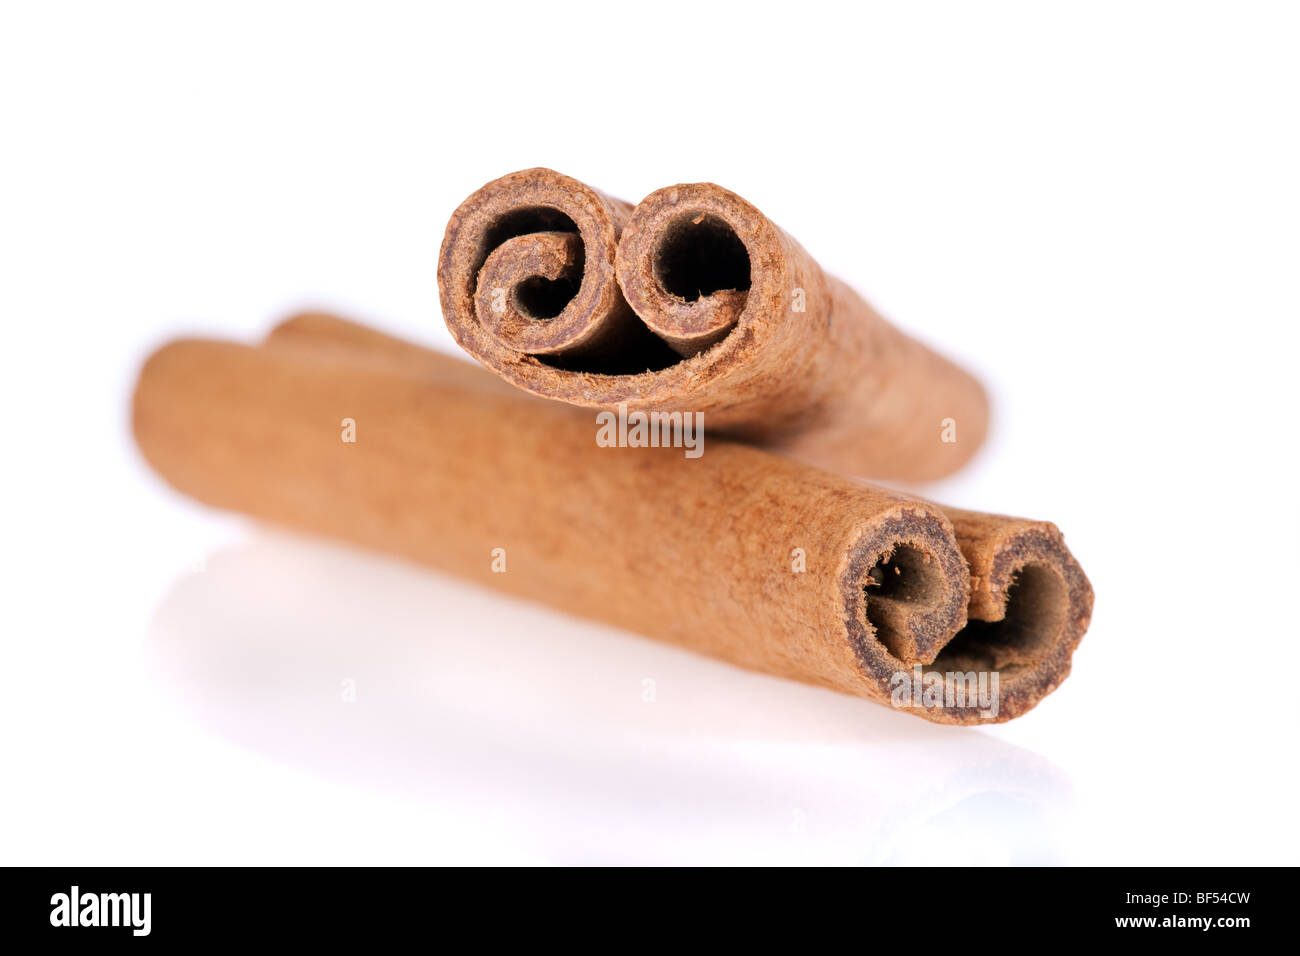 Cinnamon sticks isolated on a white background Stock Photo